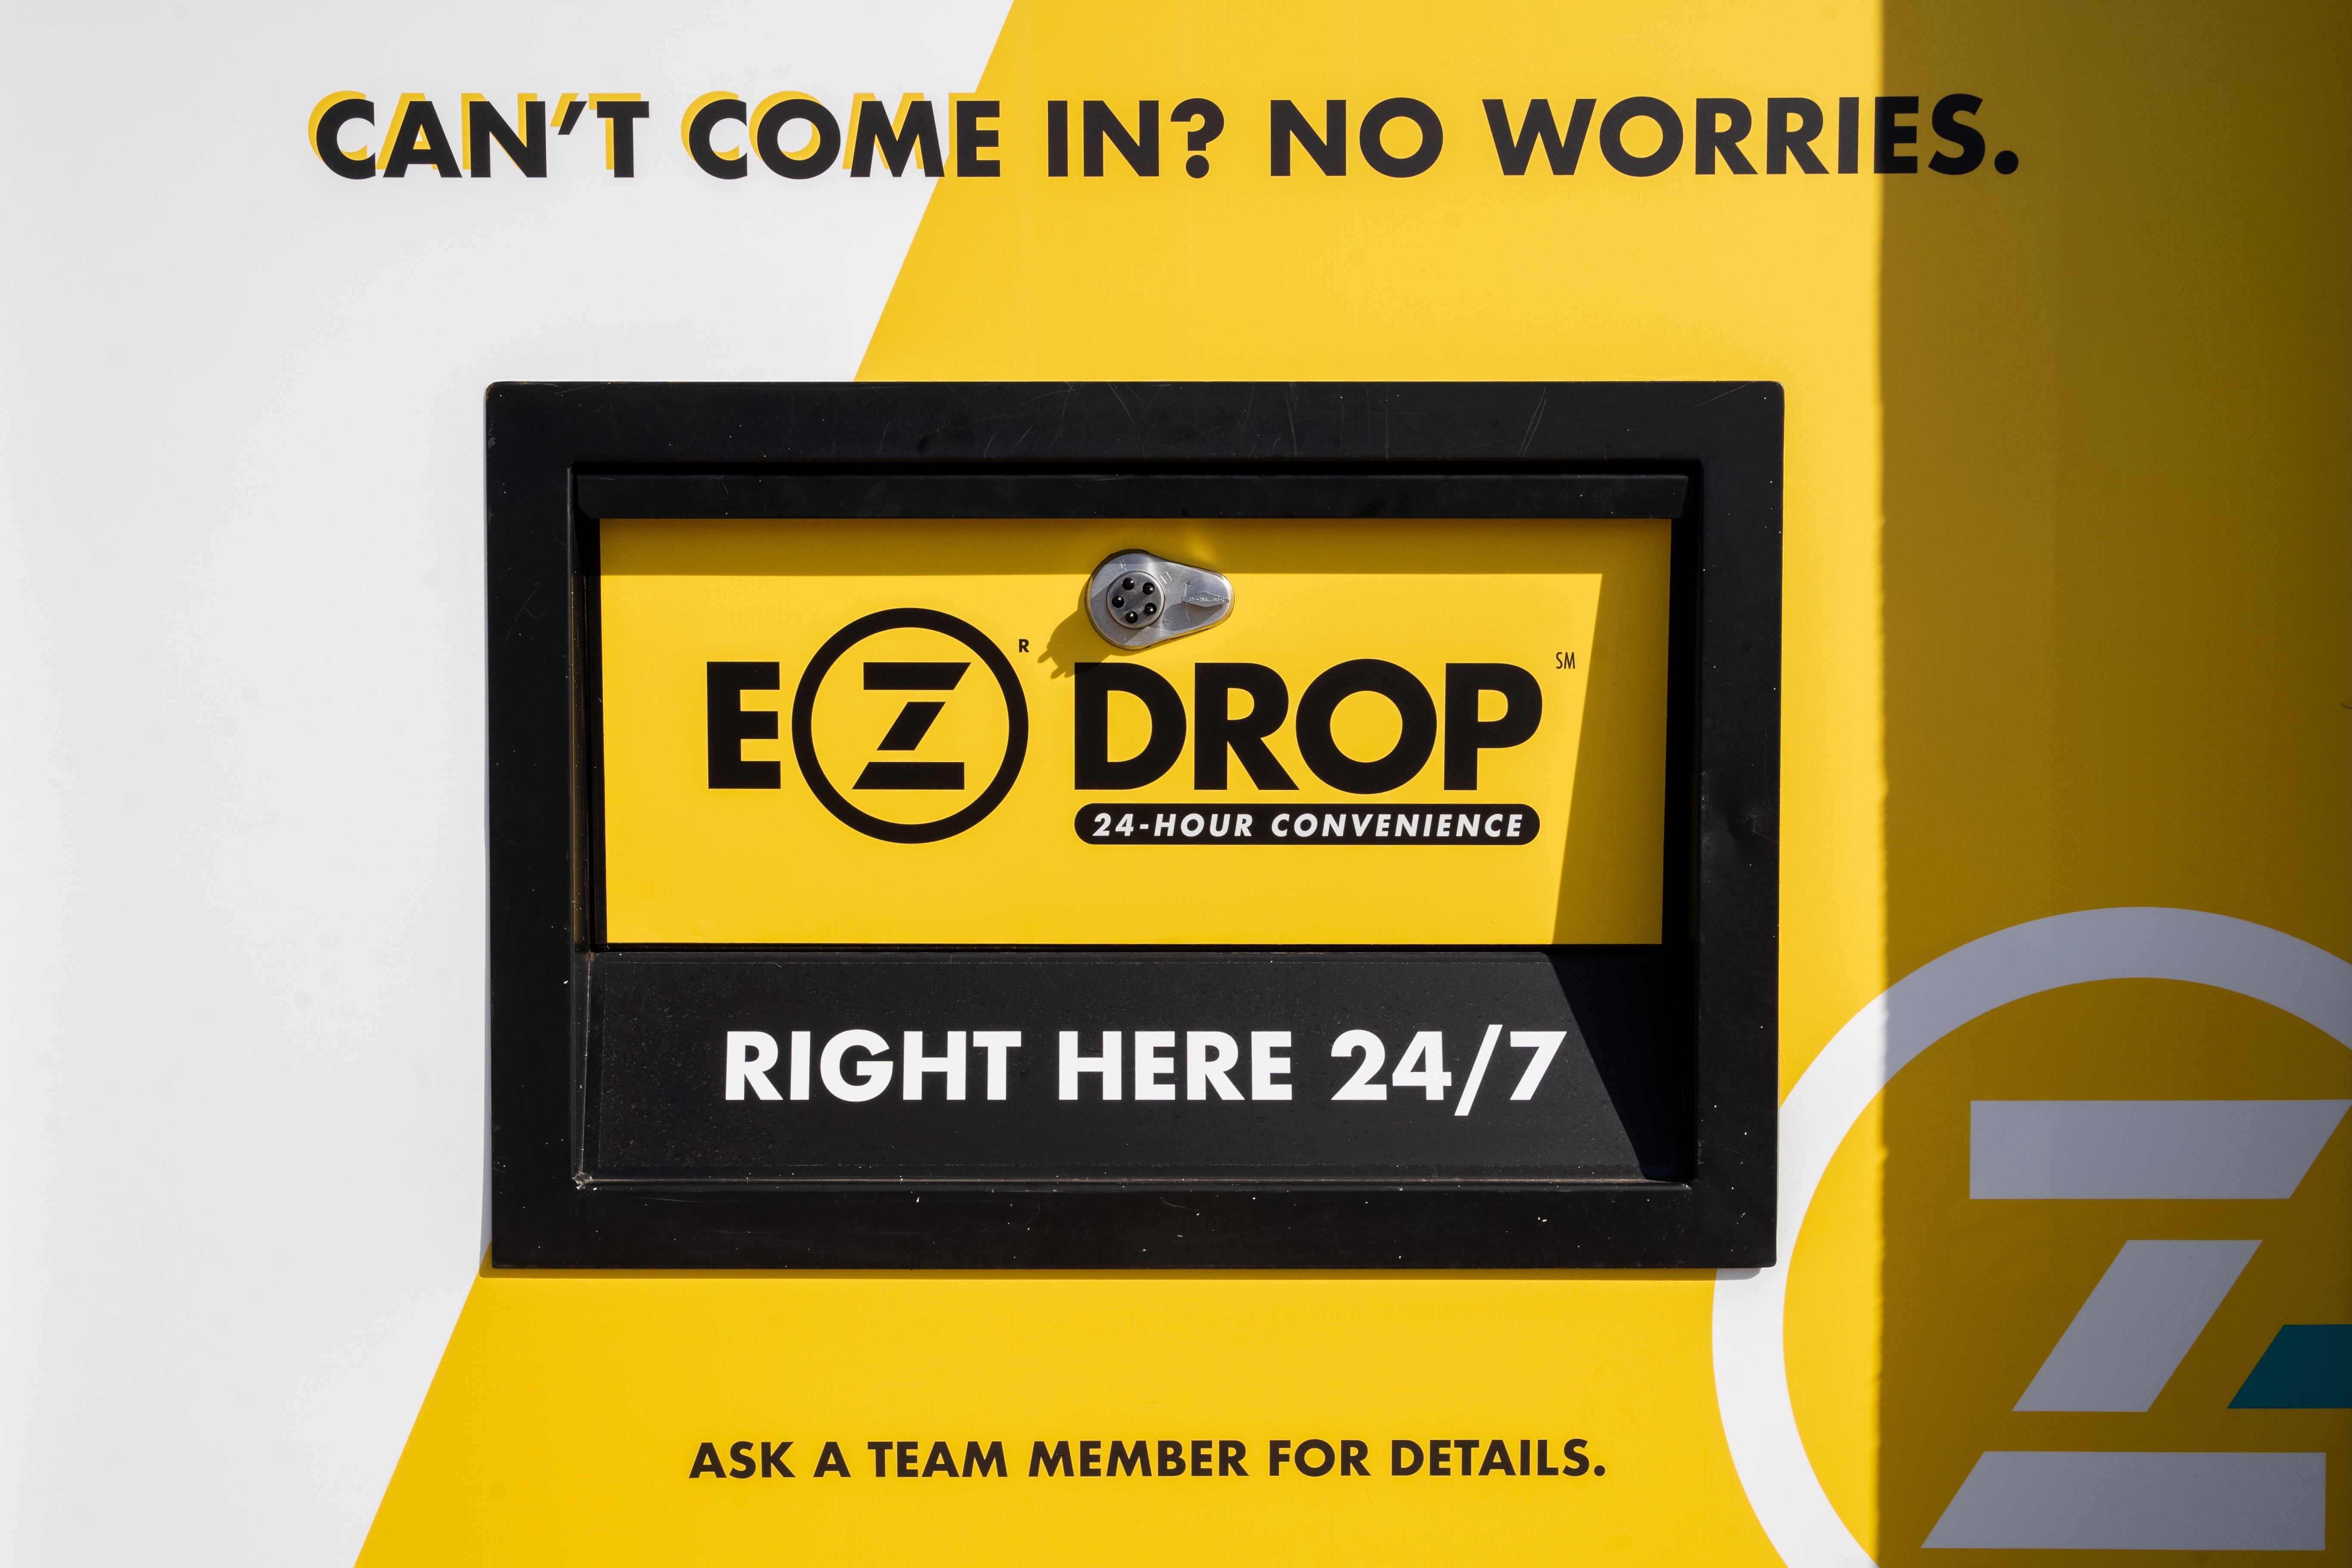 Front view of ZIPS Cleaners EZ Drop box in iconic Gold and black. Text on box explains how easy and convenient it is to use our ZIPS Cleaners EZ Drop box. Can't come in? No worries. EZ Drop 24-Hour Convenience. Right here 24/7. Ask a Team Member for details. It is that EZ.